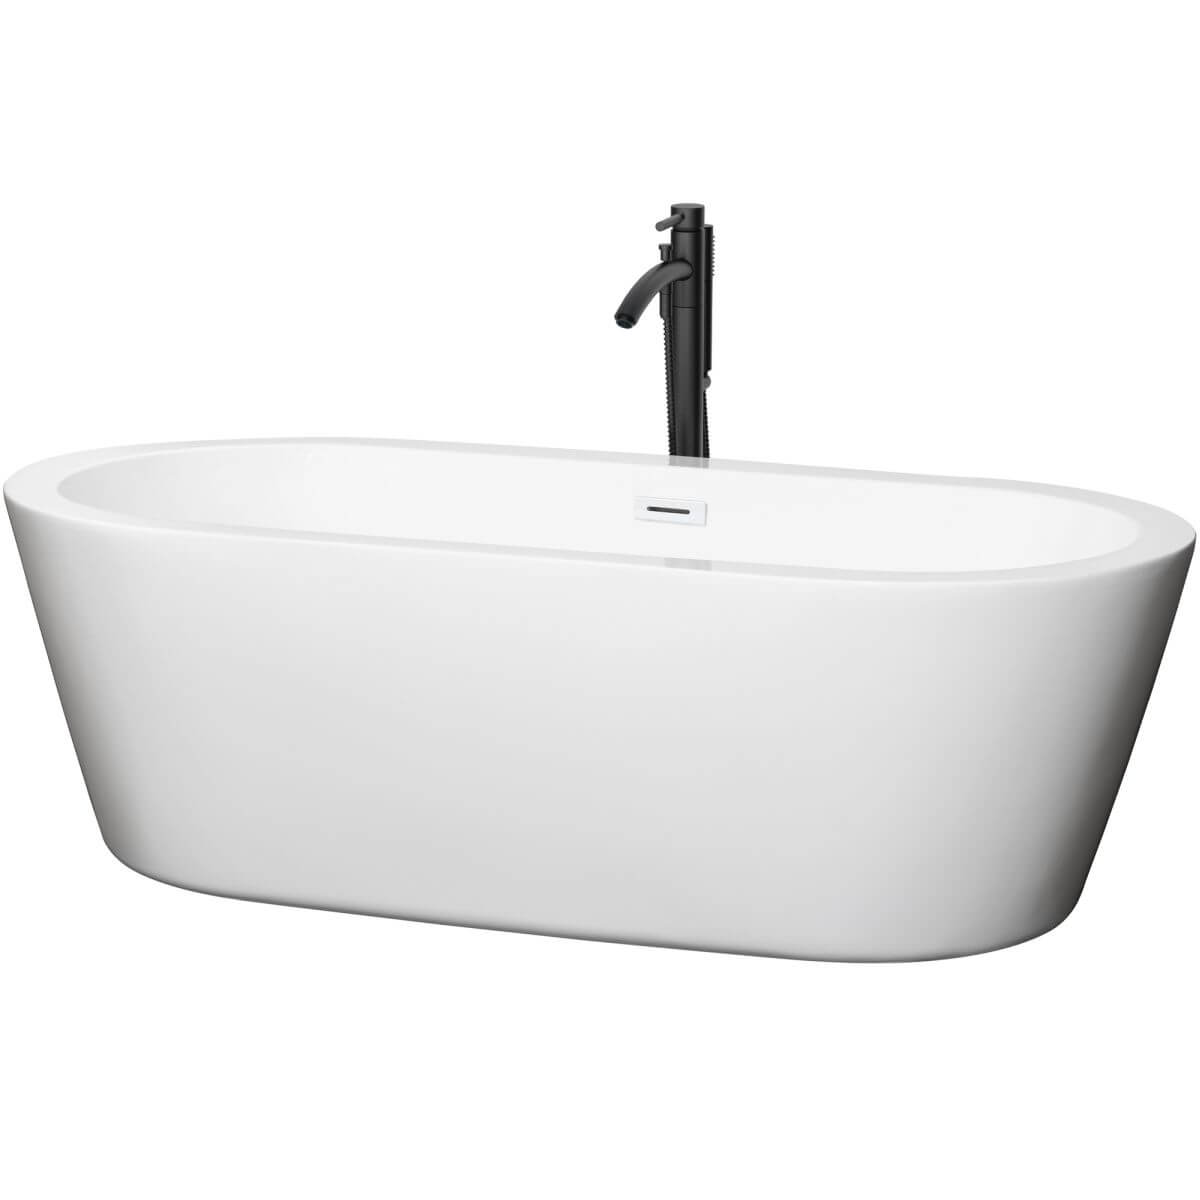 Wyndham Collection Mermaid 71 inch Freestanding Bathtub in White with Shiny White Trim and Floor Mounted Faucet in Matte Black - WCOBT100371SWATPBK